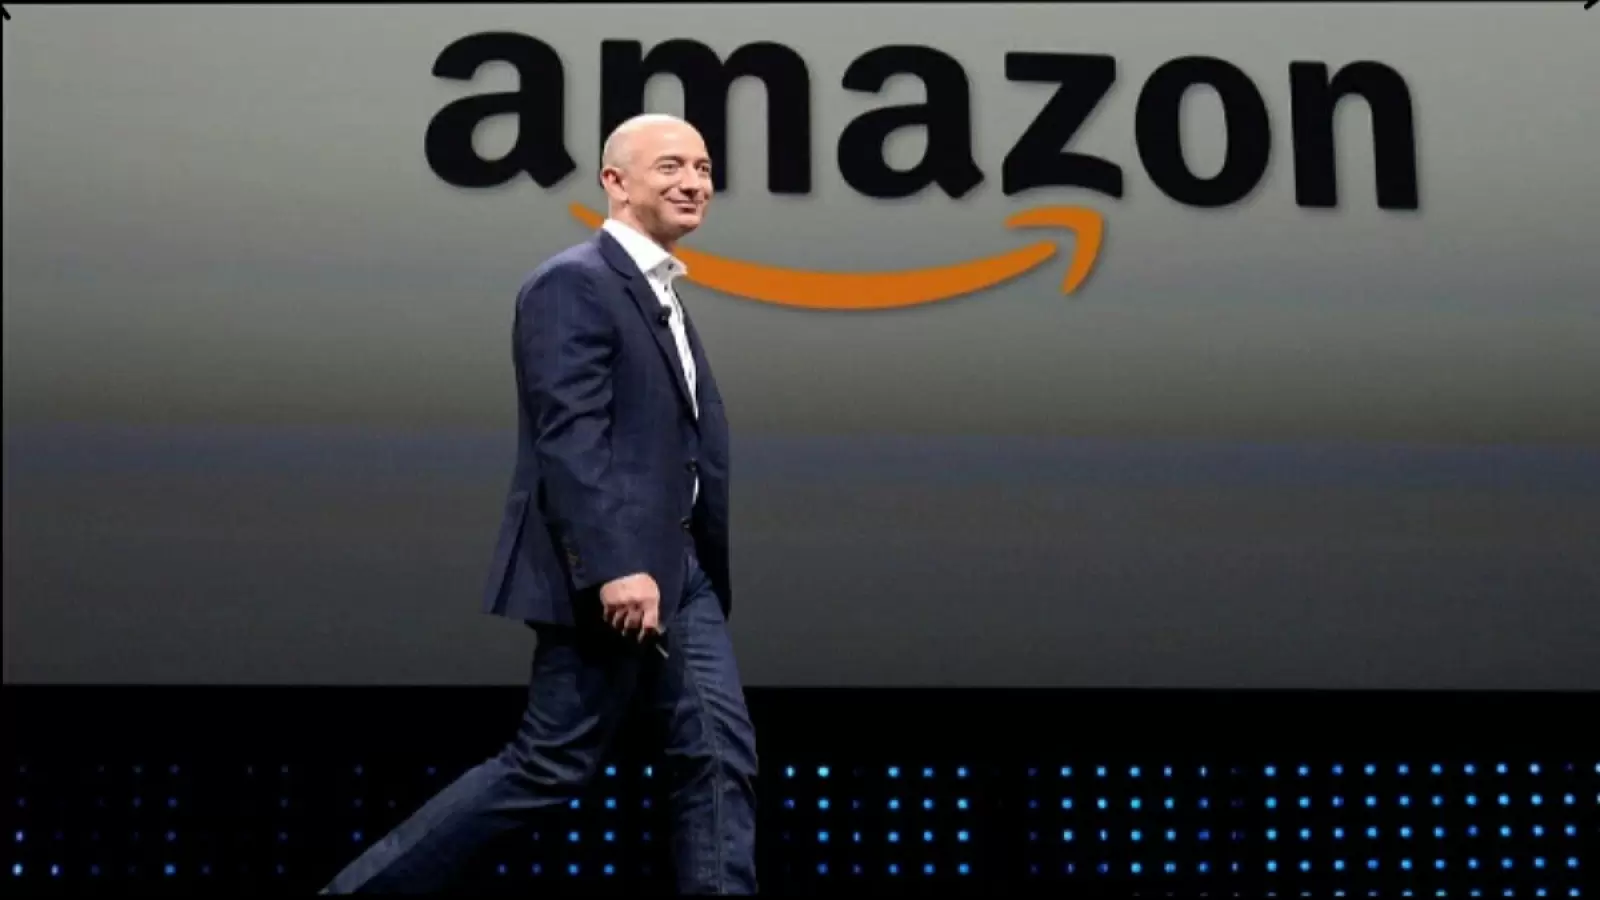 Amazon founder Jeff Bezos sold 1.2 crore shares, plans to sell 5 crore shares in the next one year